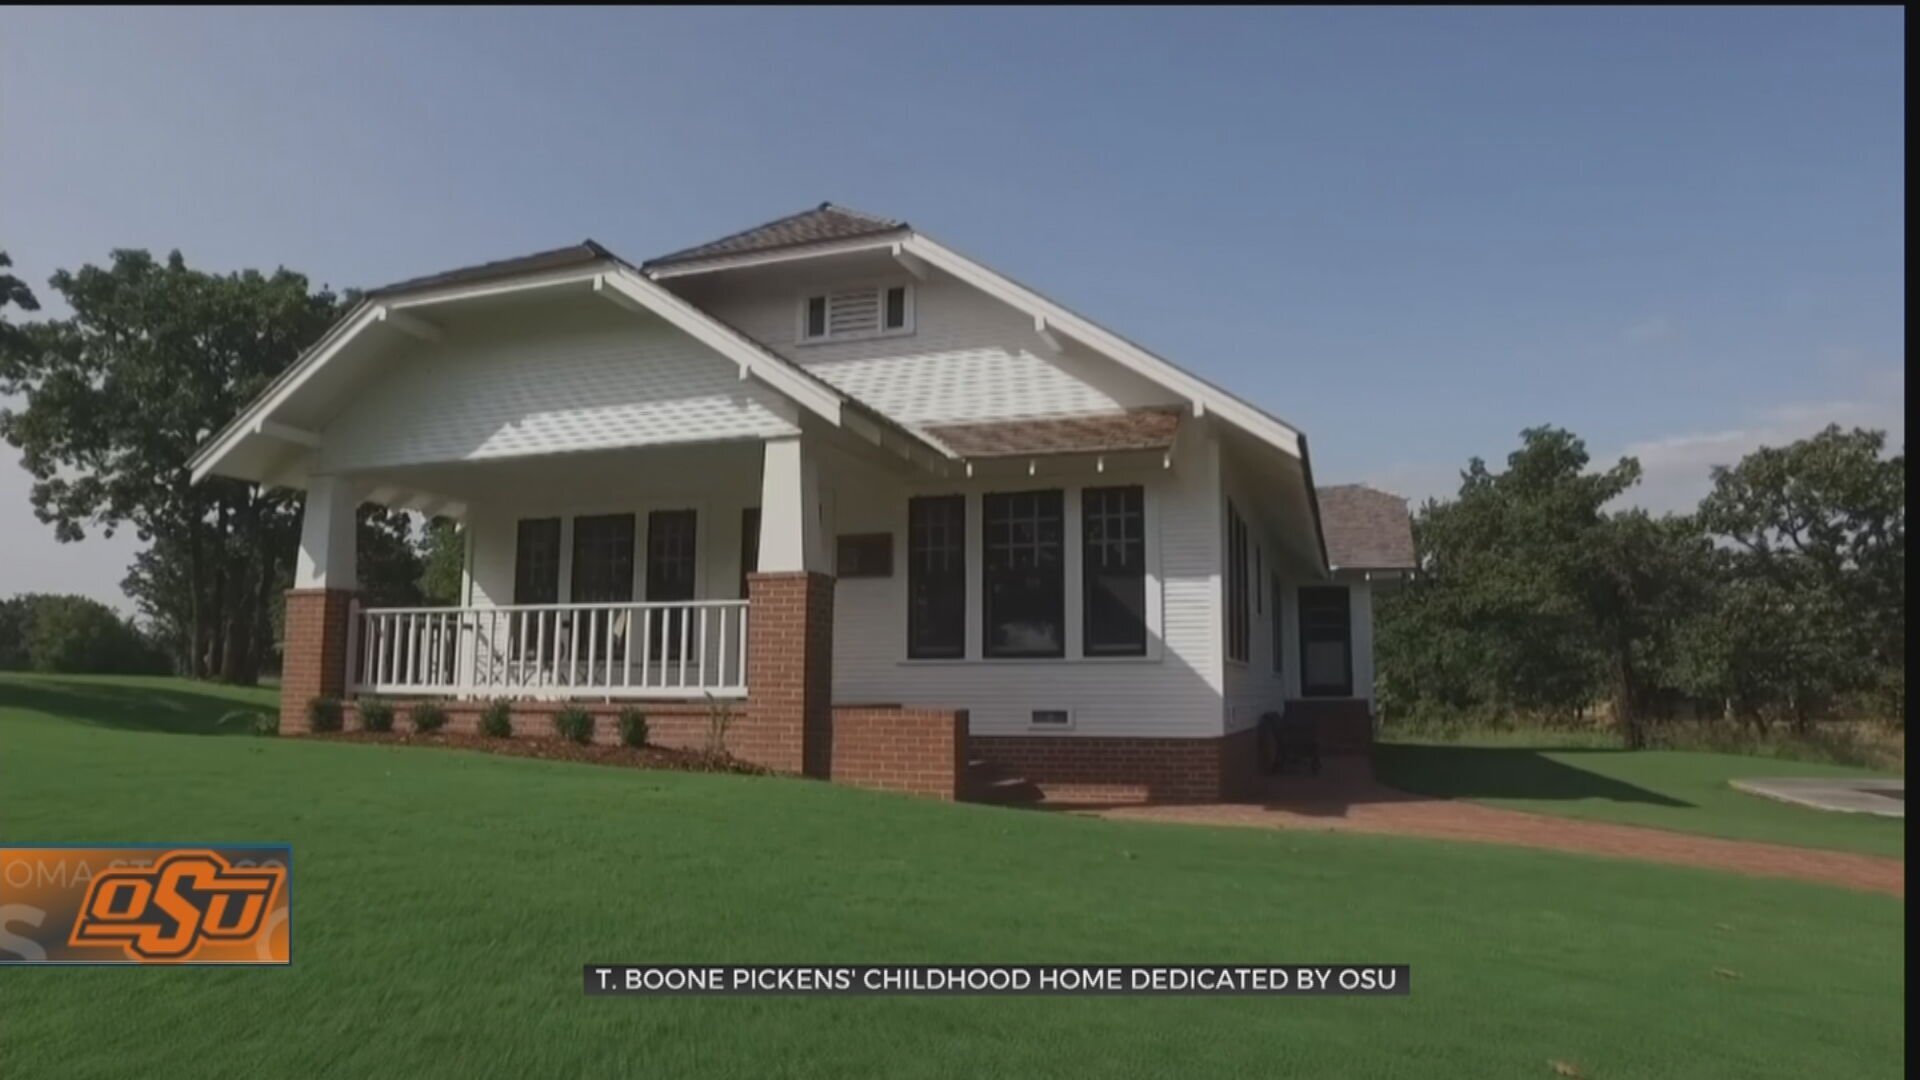 Childhood Home Of T. Boone Pickens Dedicated By OSU 